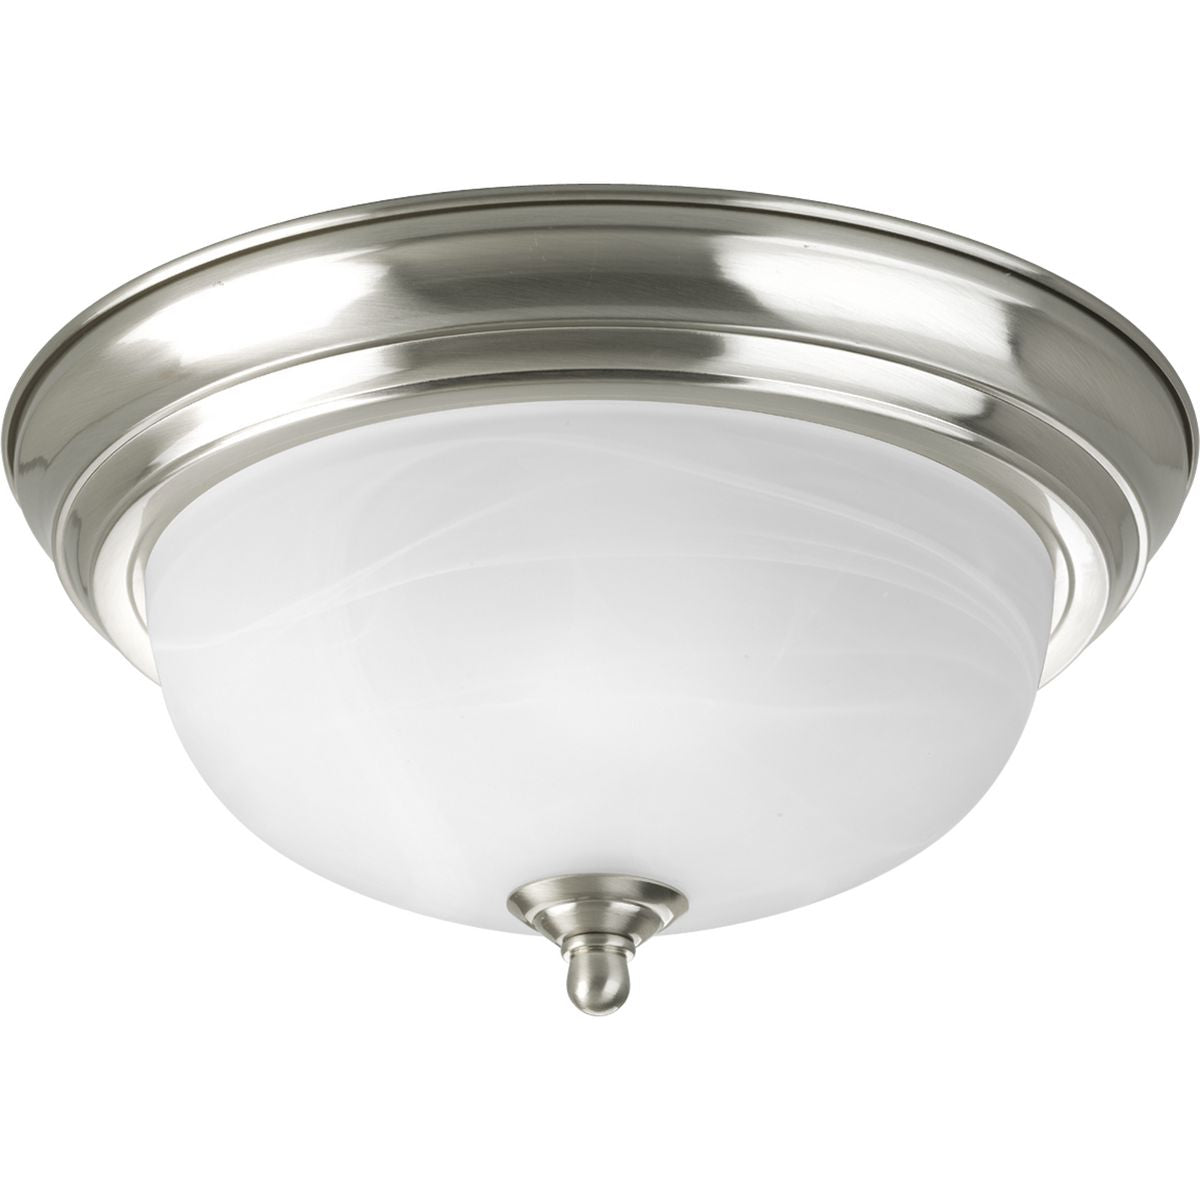 PROGRESS LIGHTING P3924-09 Brushed Nickel One-Light Dome Glass 11-3/8" Close-to-Ceiling